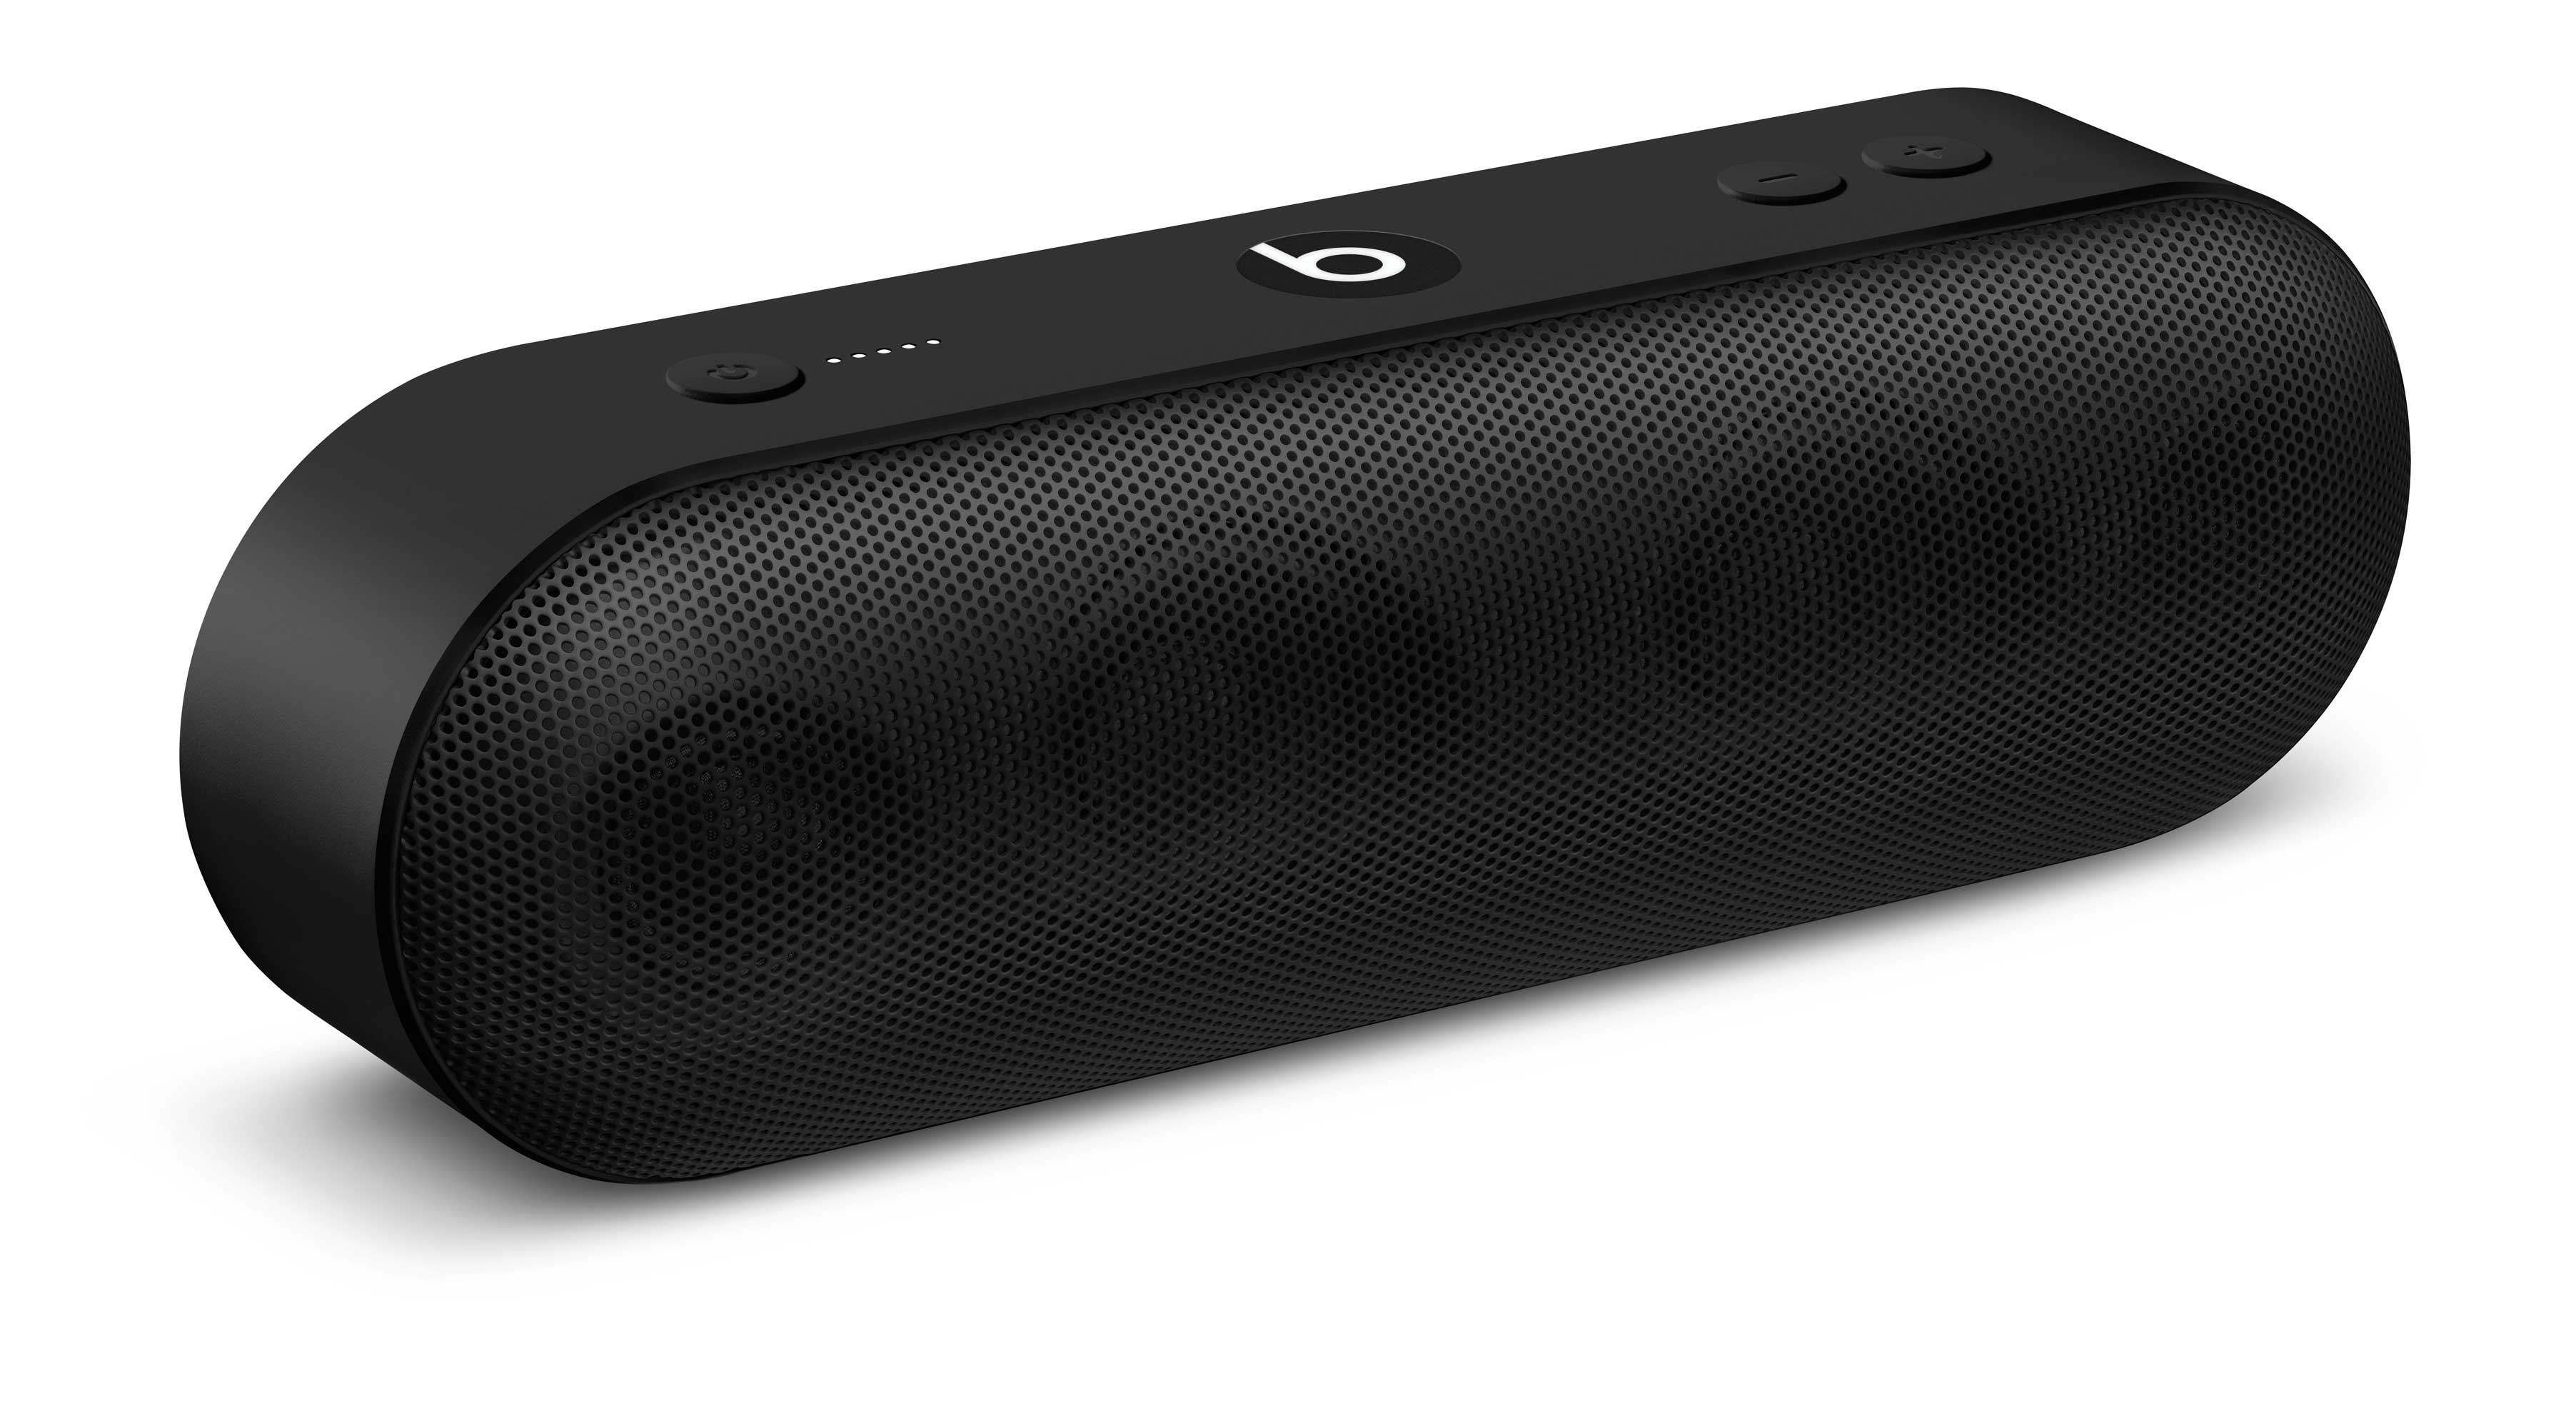 Beats by Dr. Dre Pill+ Portable Bluetooth Speaker, Black, ML4M2LL/A - image 6 of 10